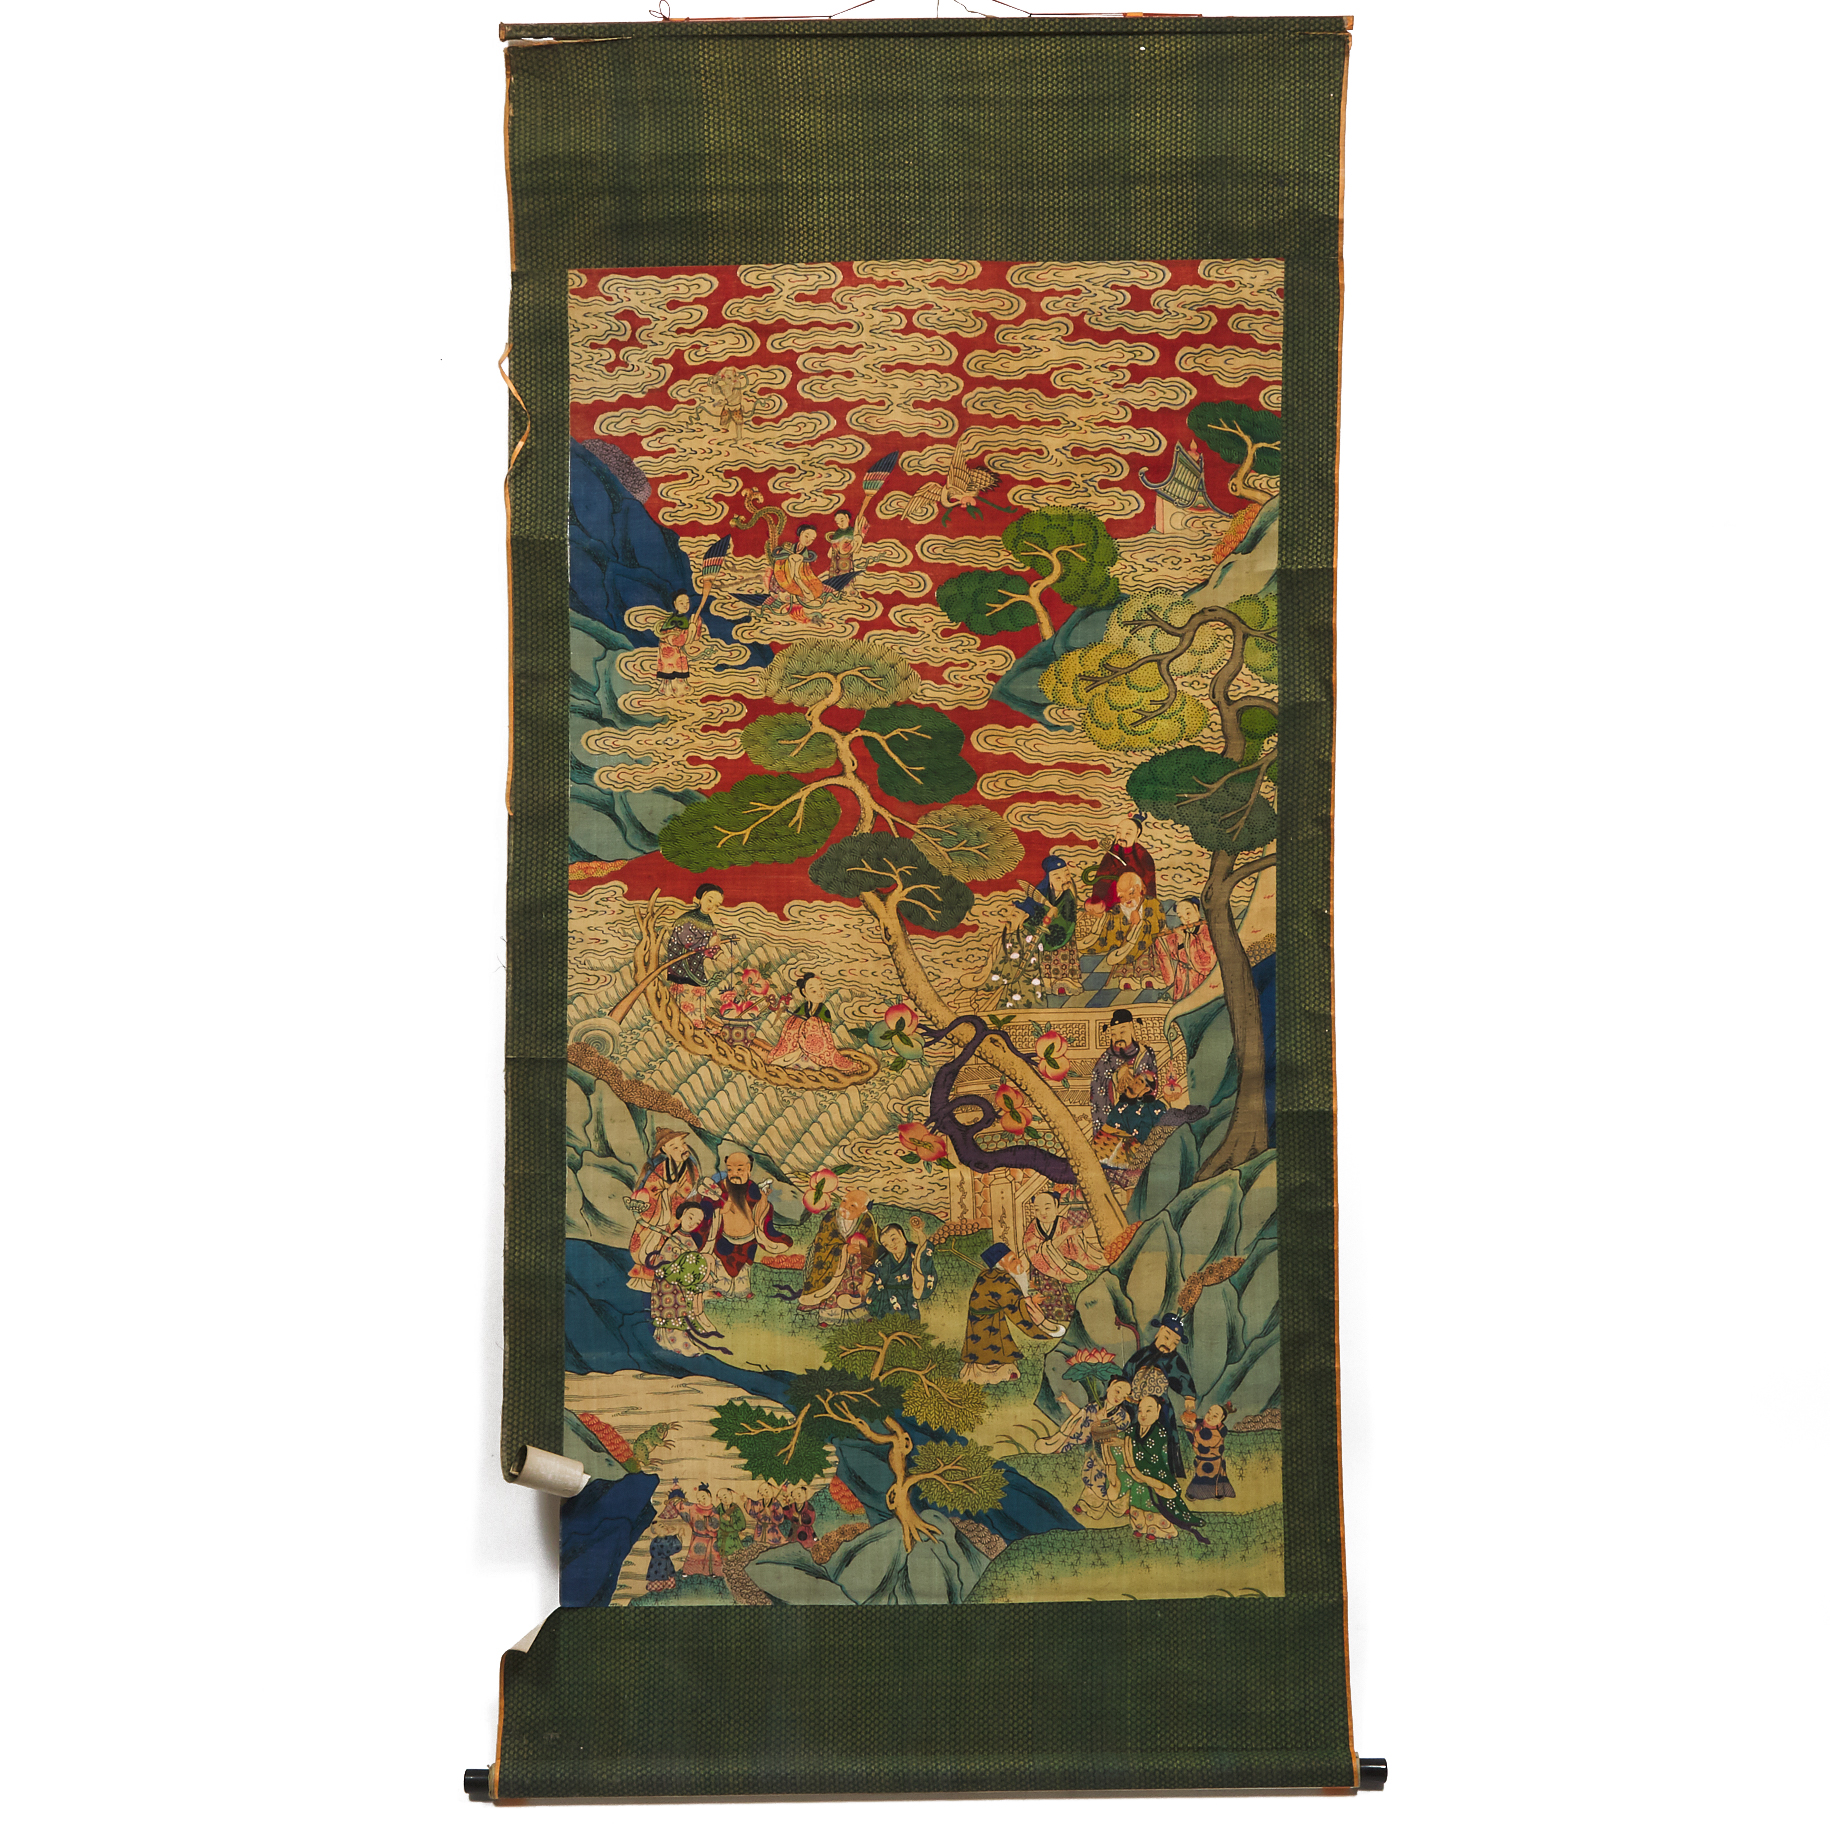 A Large Daoist Immortals 'Birthday' Textile Painting